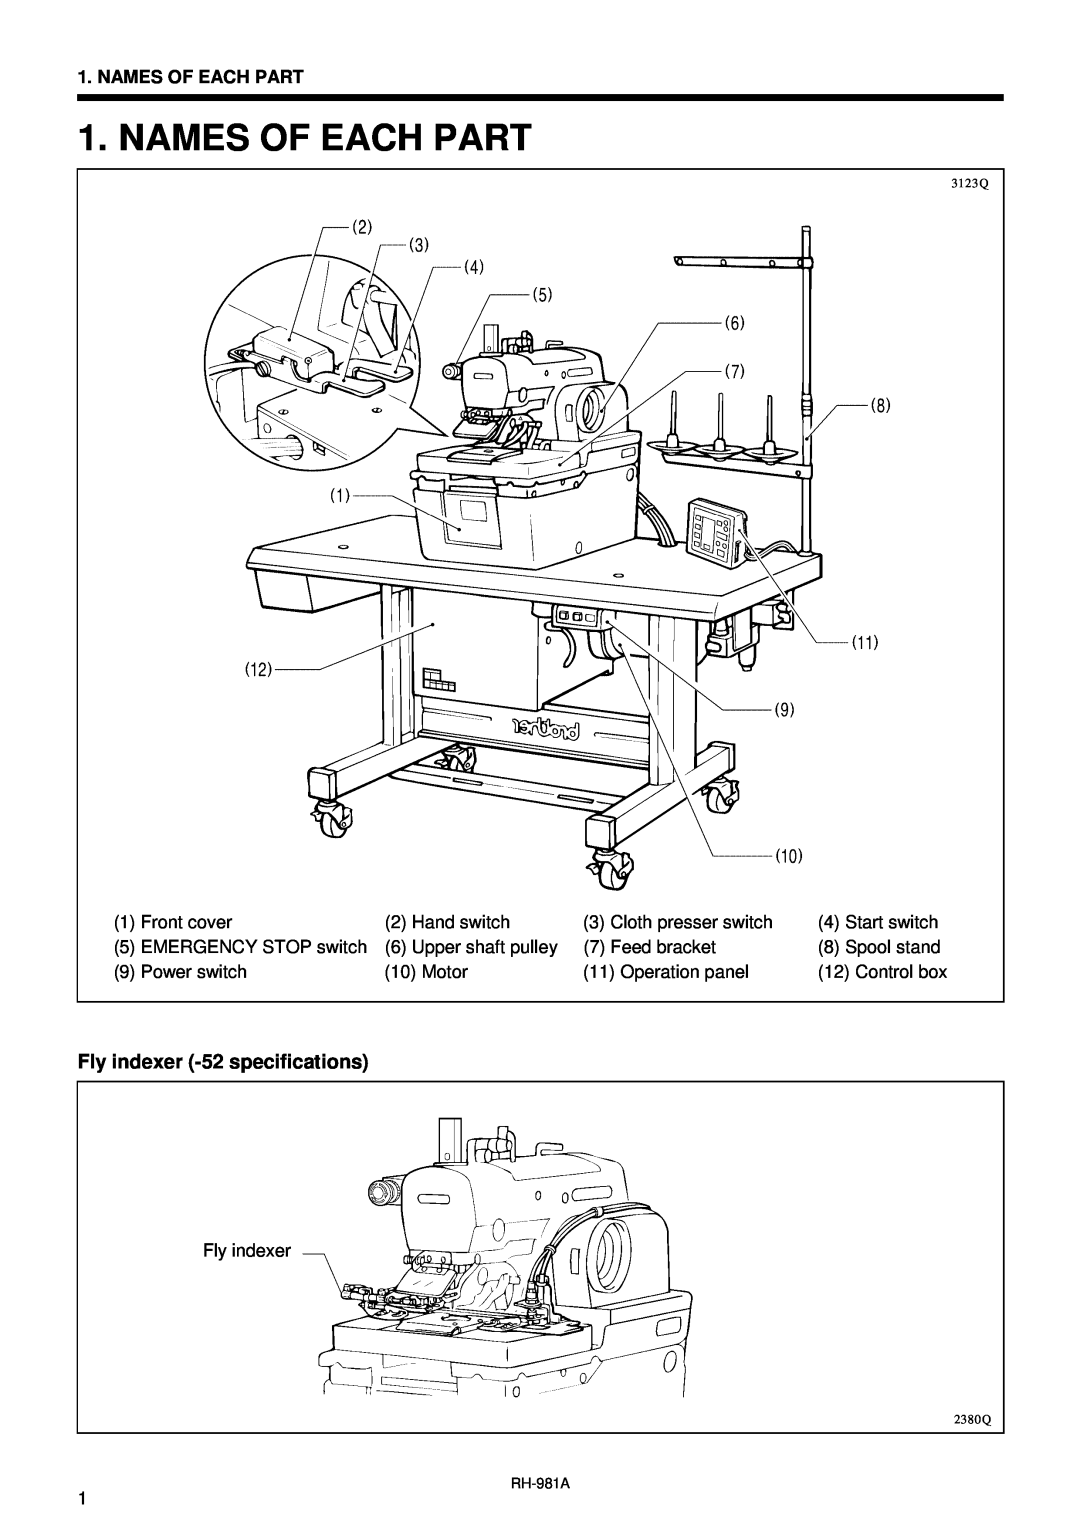 Brother rh-918a manual Names Of Each Part, Fly indexer -52 specifications 